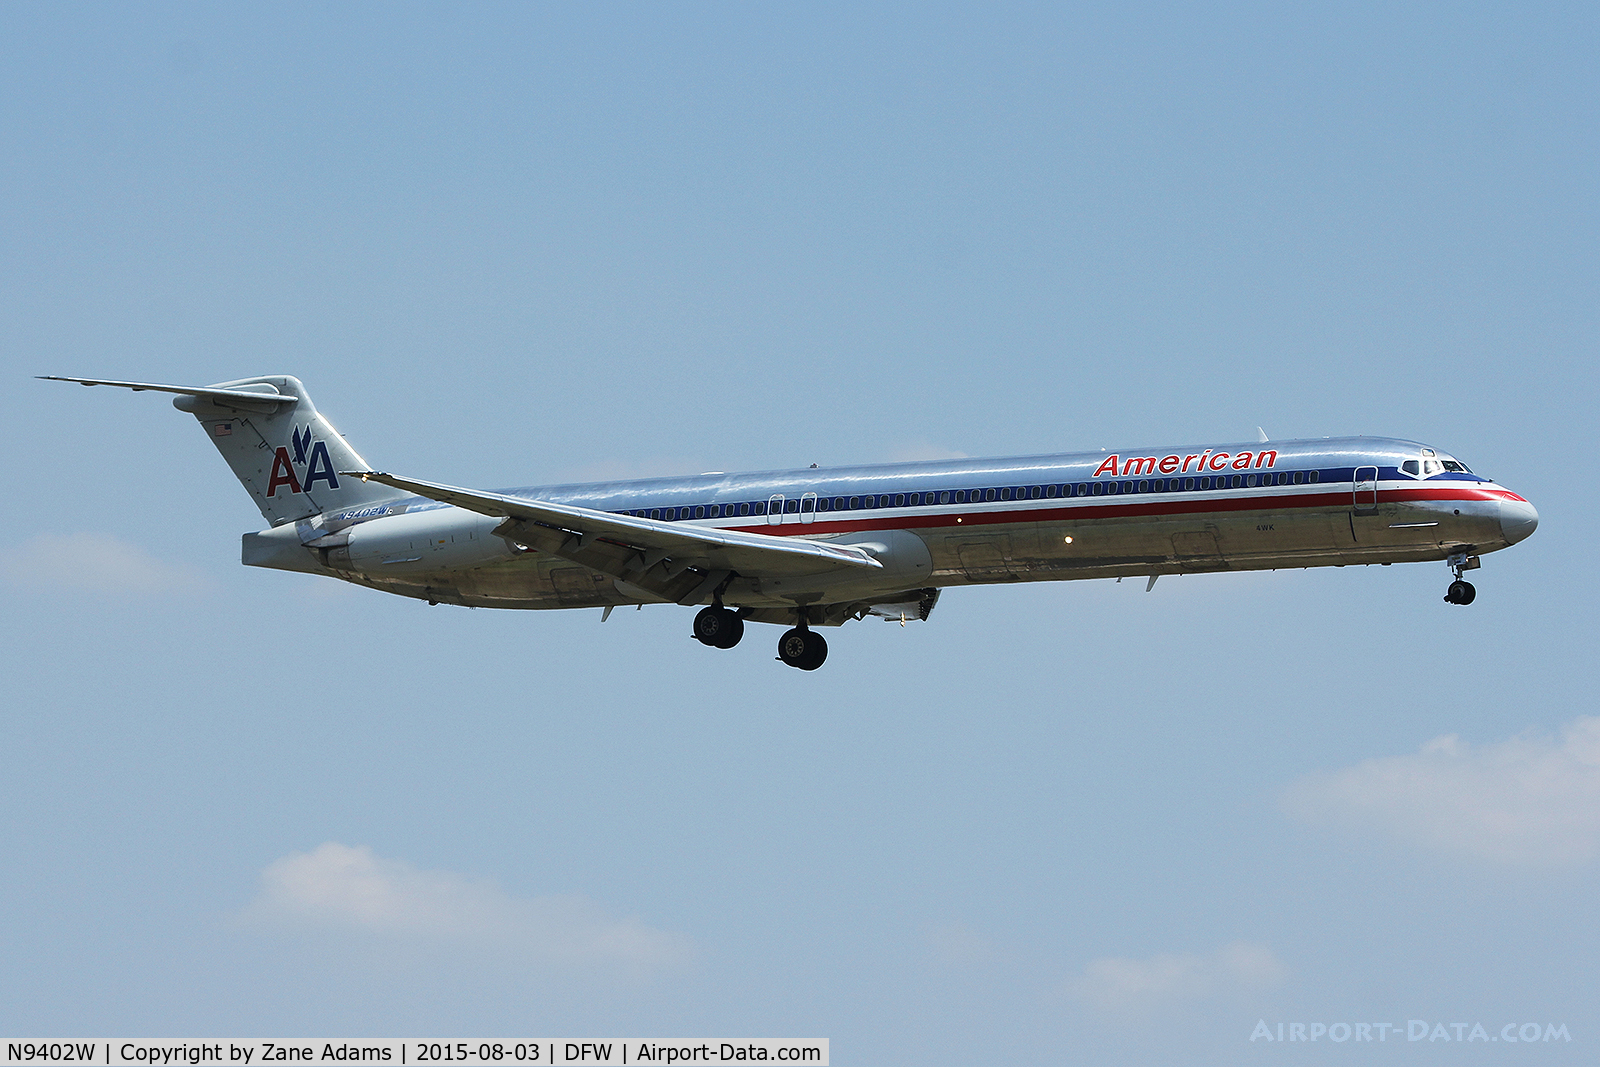 N9402W, 1992 McDonnell Douglas MD-83 (DC-9-83) C/N 53138, American Airlines arriving at DFW Airport